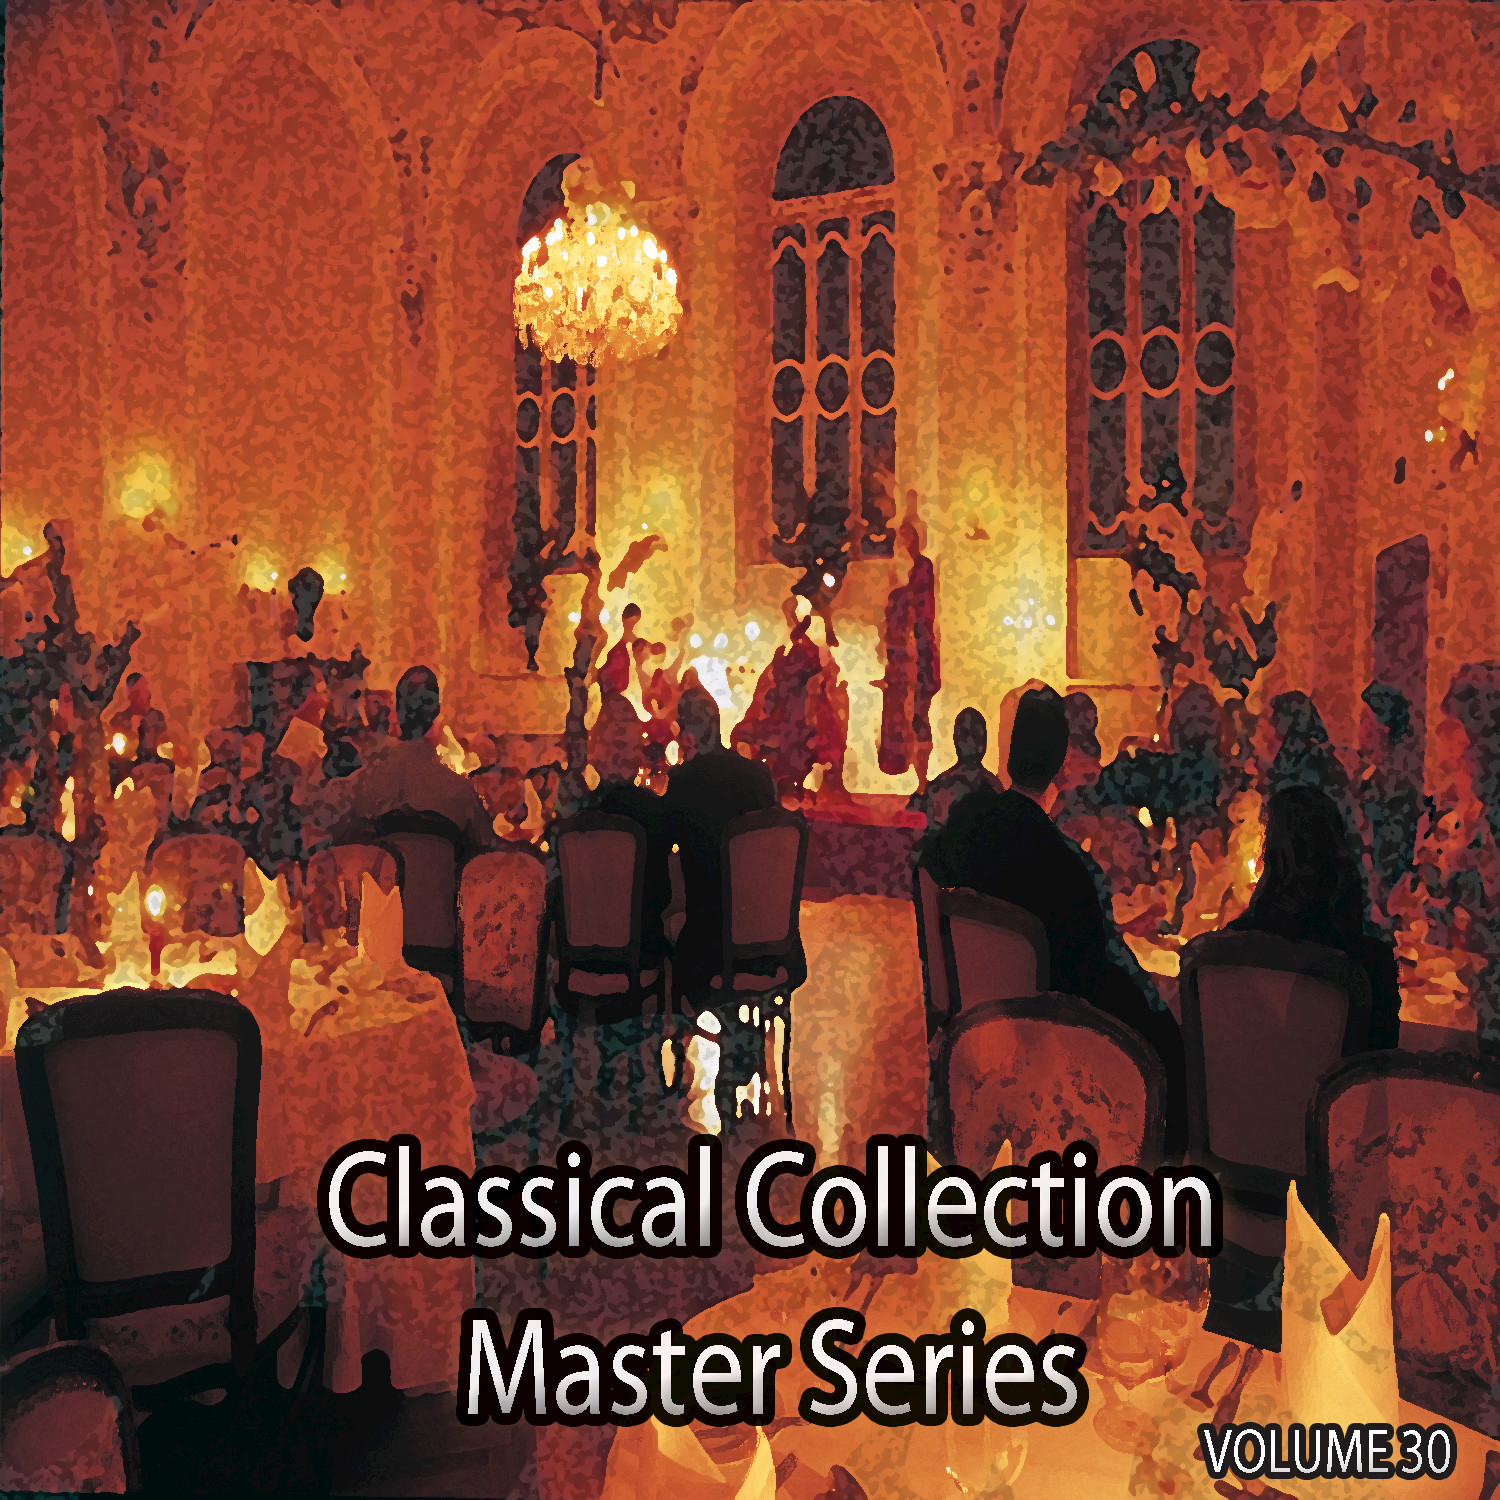 Concerto for Cello and Orchestra No. 1 in A Minor, Op.33: Pt. 2